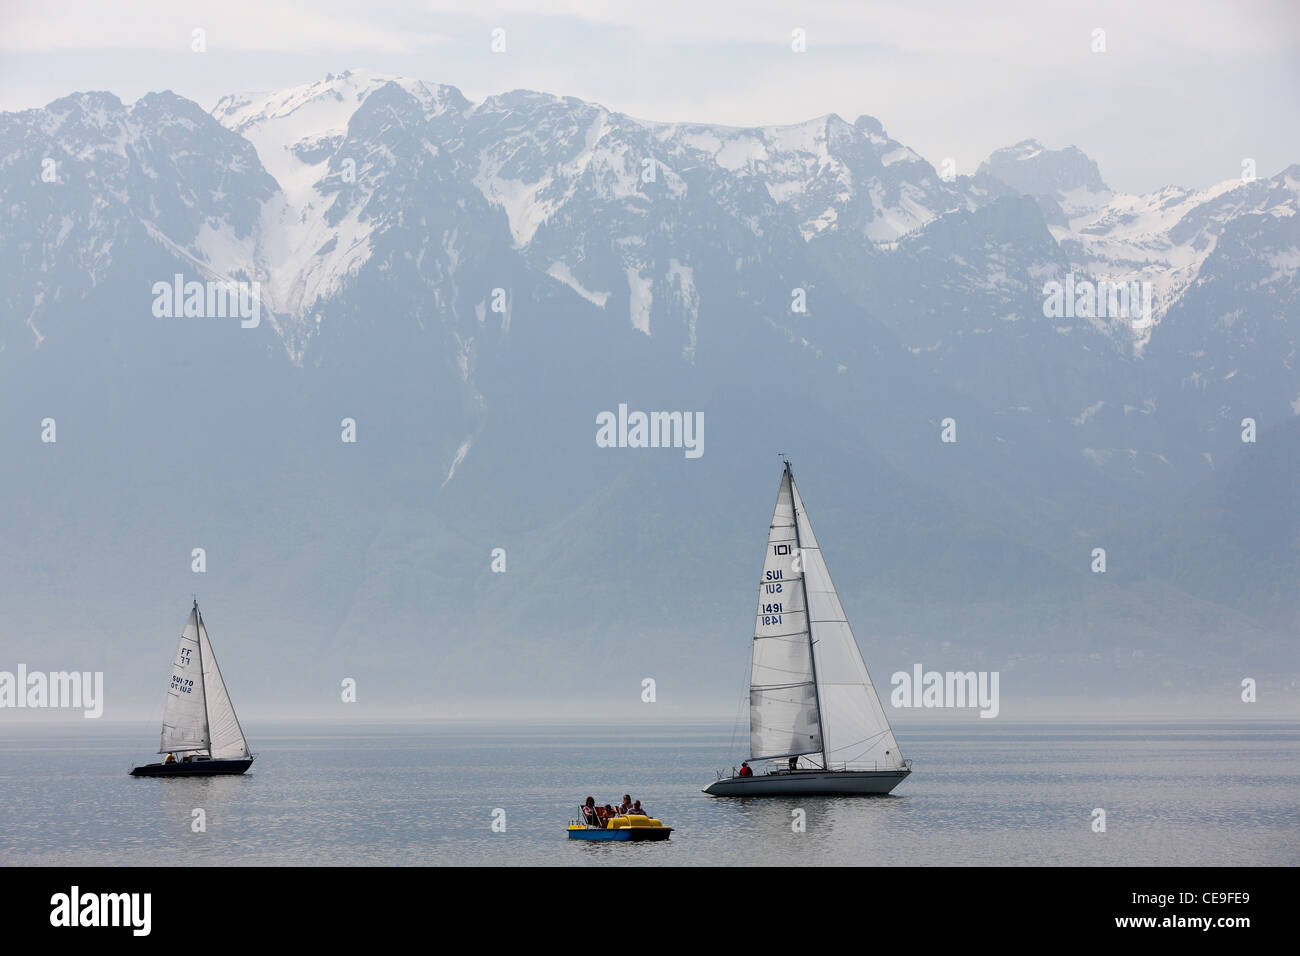 Sailboats on Lake Geneva. In the background you can see snowy peaks of the Alps. Stock Photo